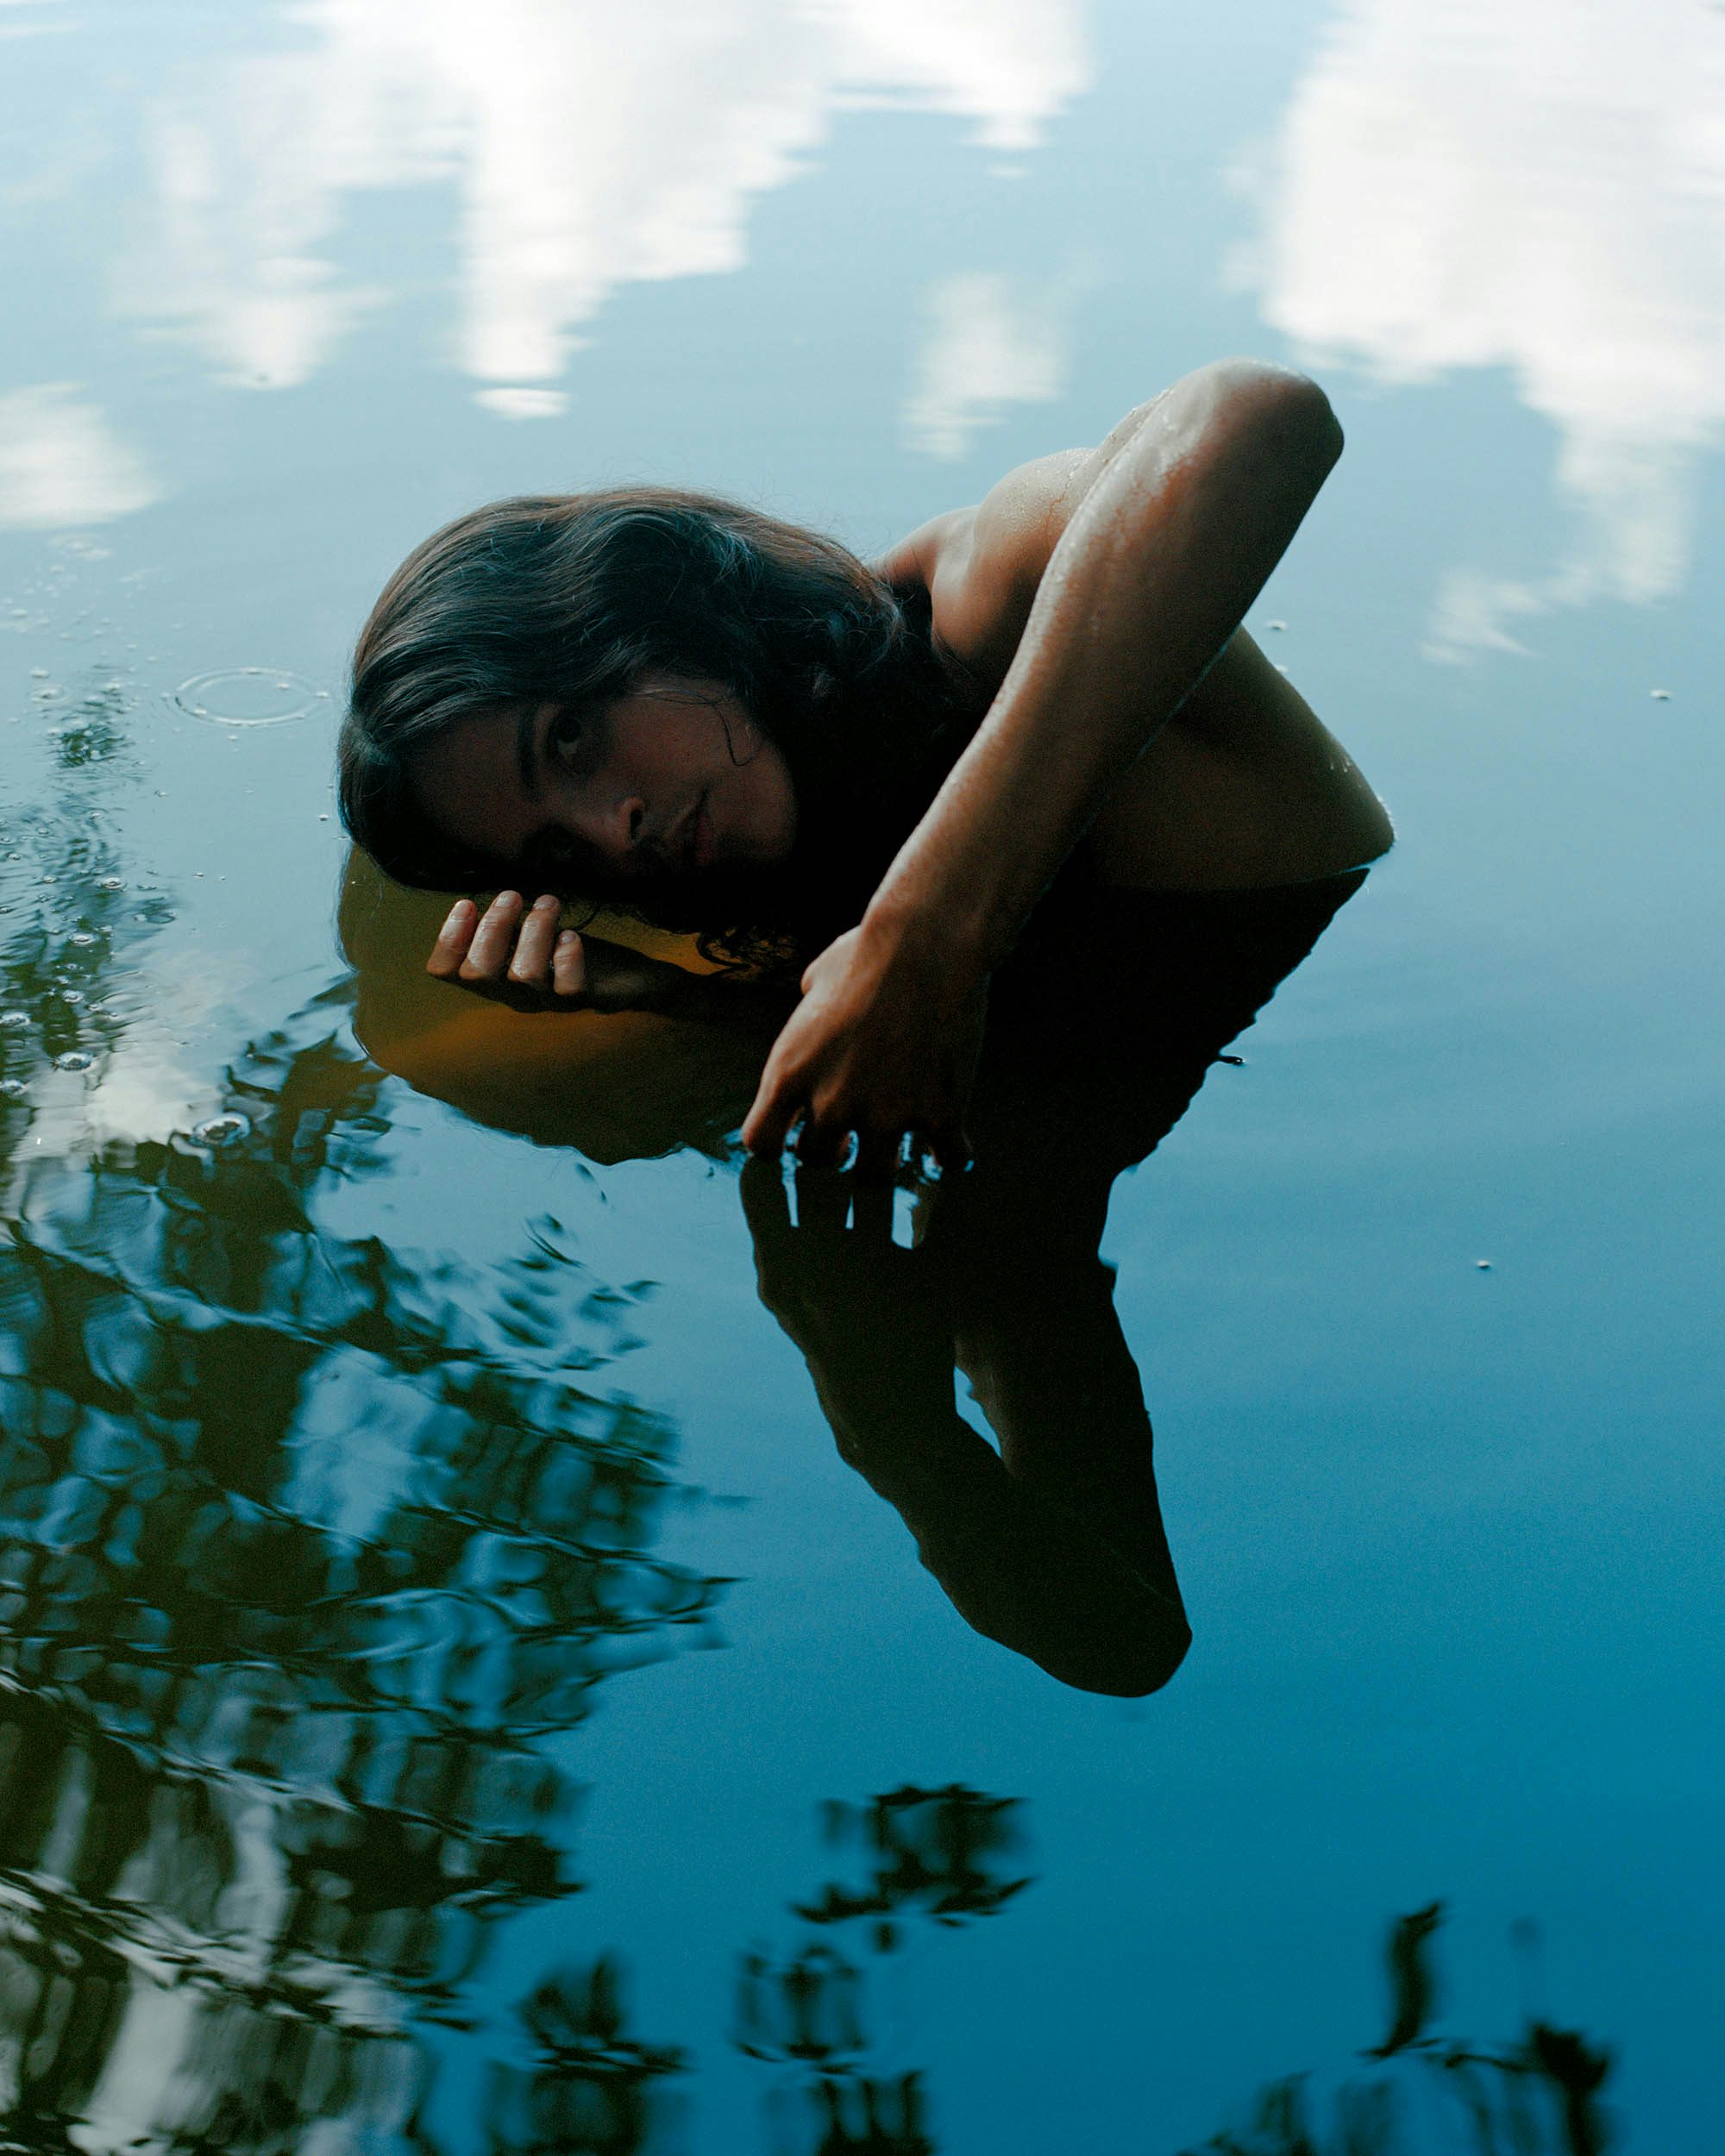 Photograph of a person whose body is submerged in water in Like a River by Daniel Jack Lyons